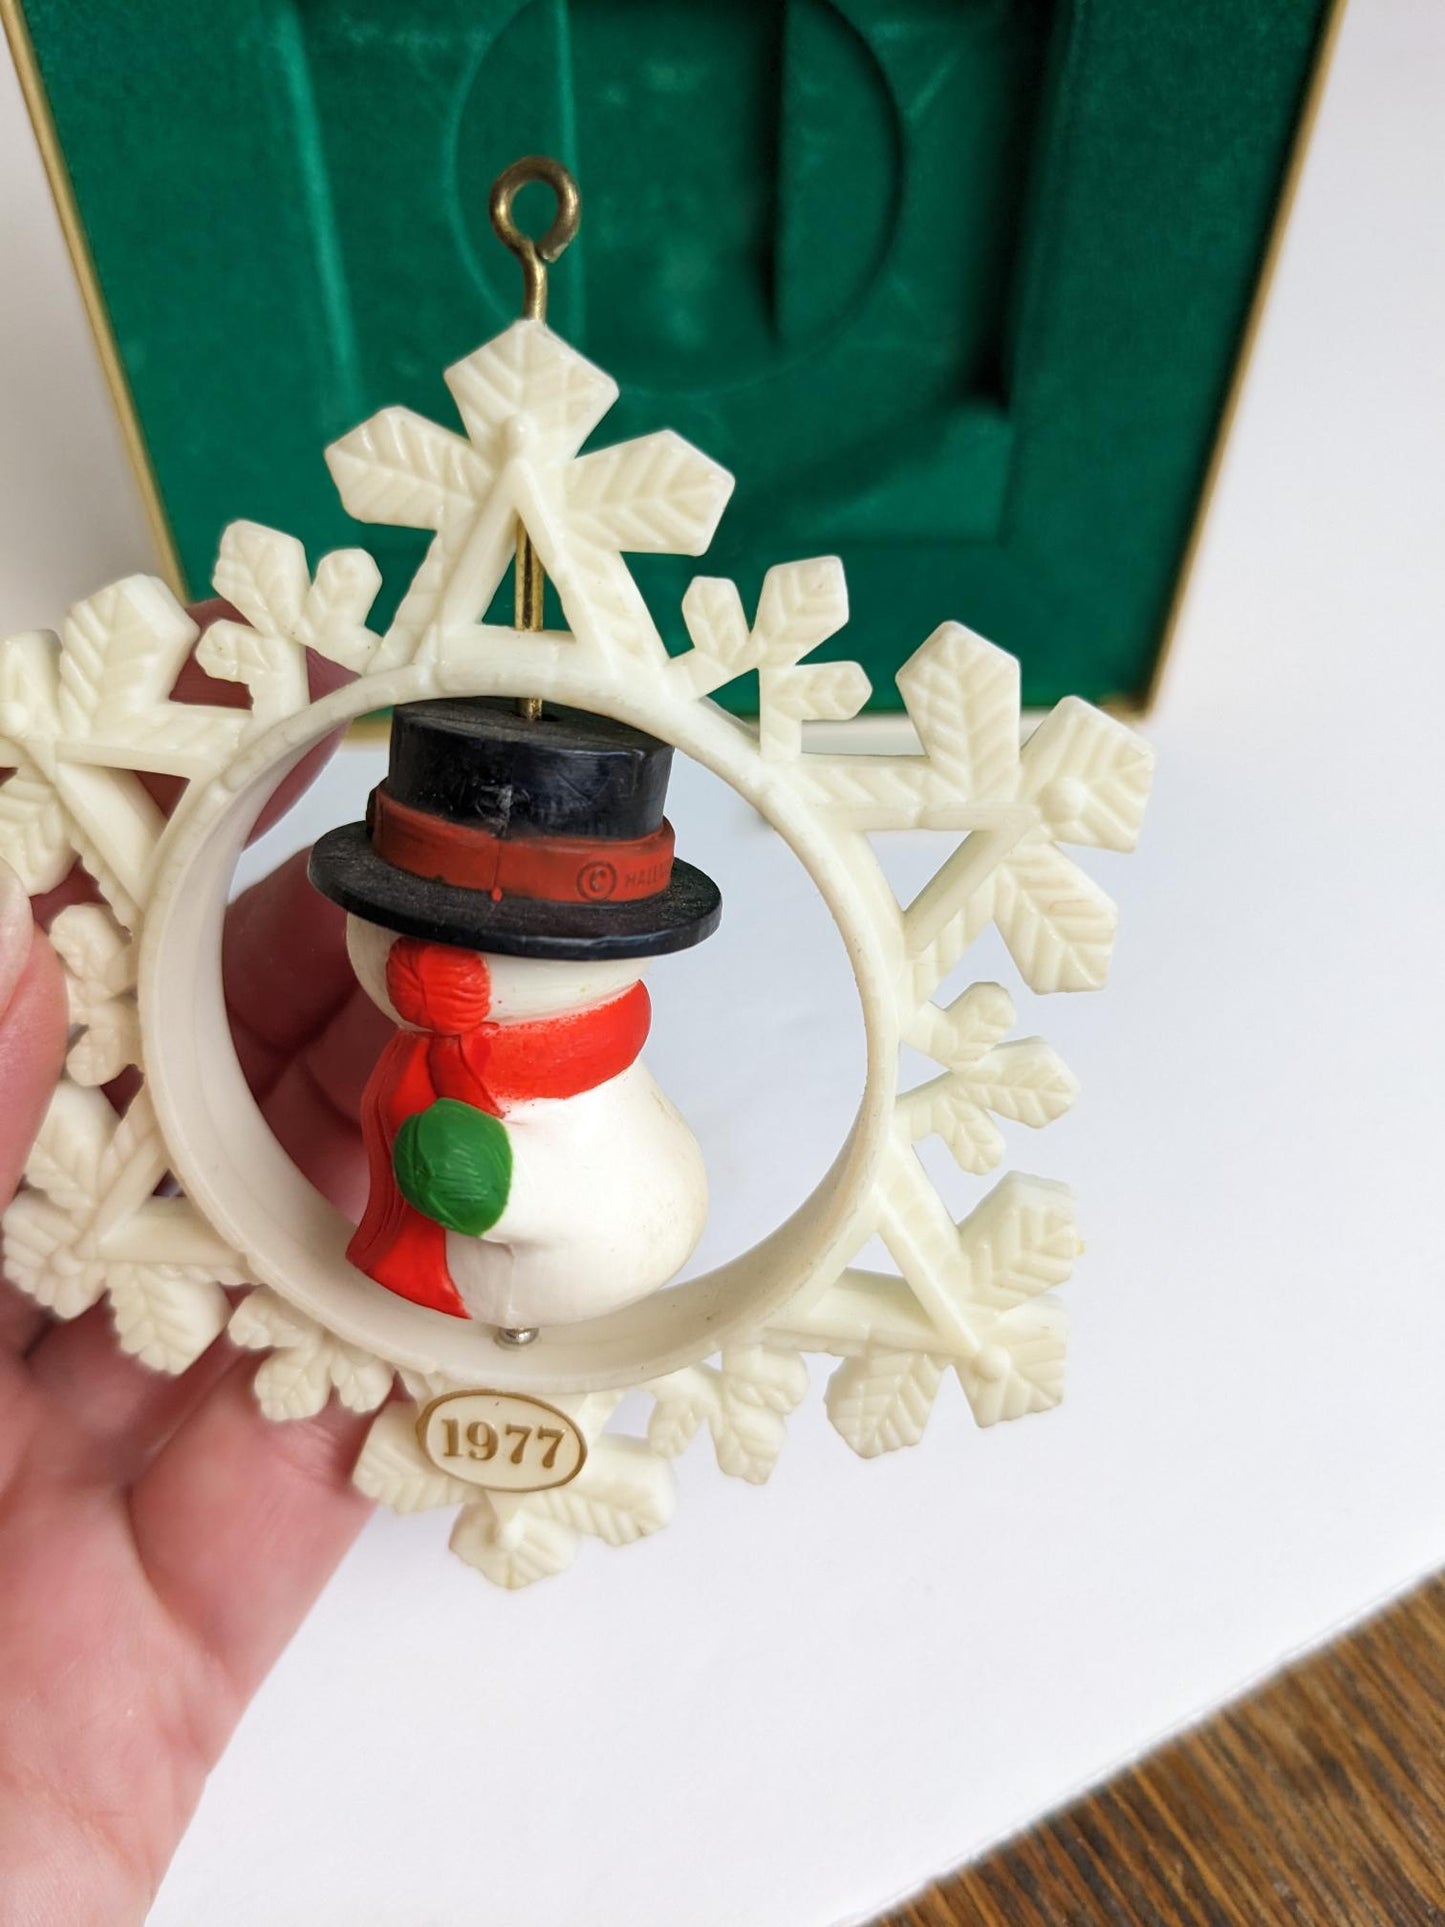 Twirl-About 1977 Snowflake Christmas Ornament